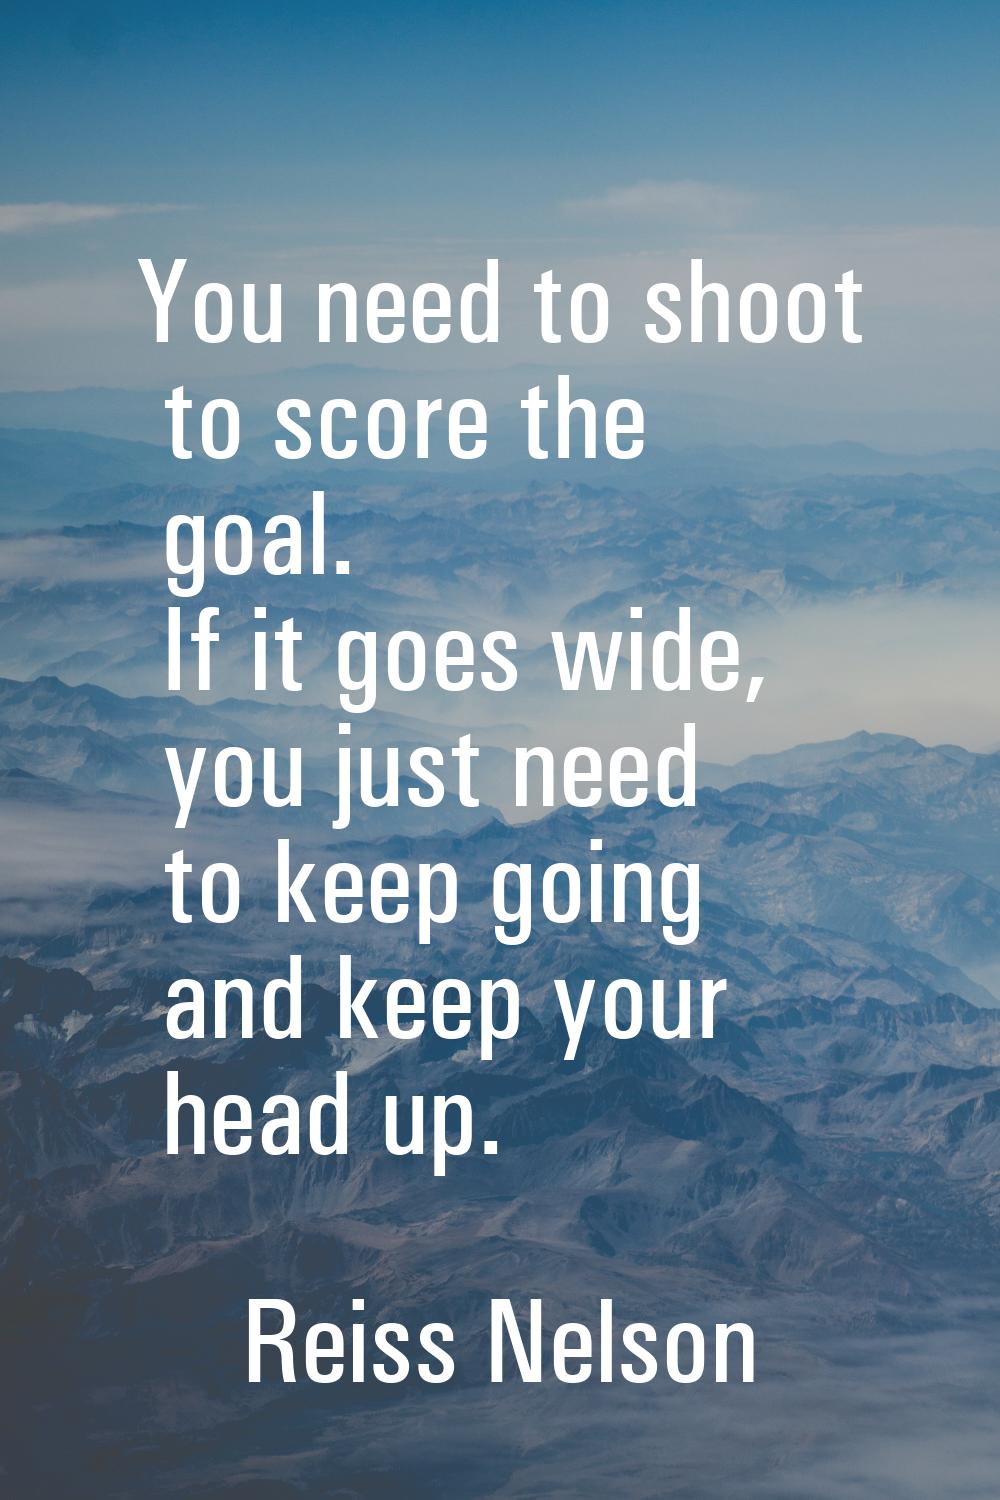 You need to shoot to score the goal. If it goes wide, you just need to keep going and keep your hea